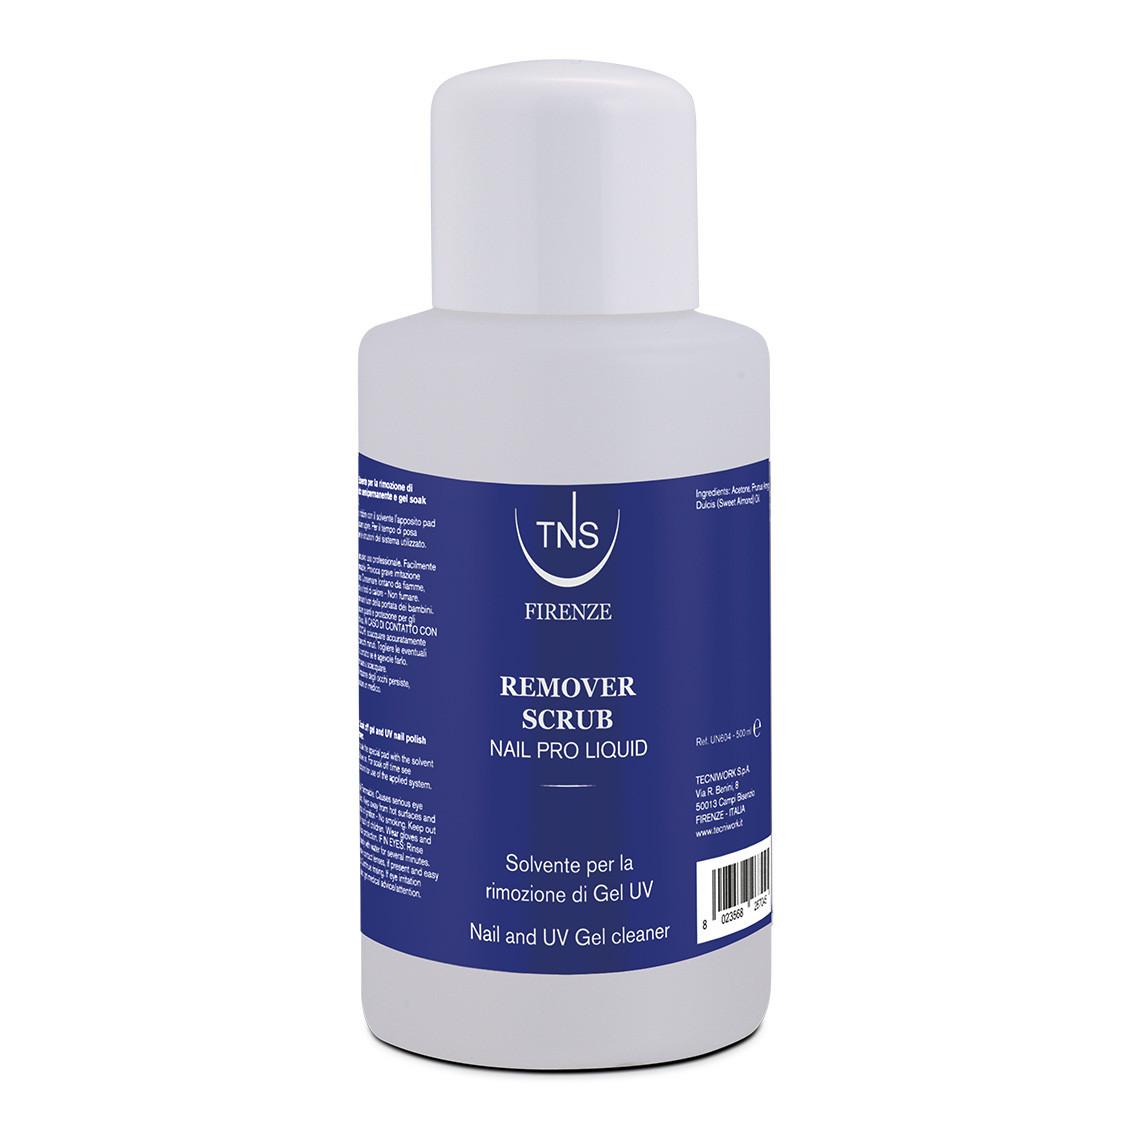 Solvent for semipermanent nail polish and gel soak off Remover Scrub TNS 500 ml